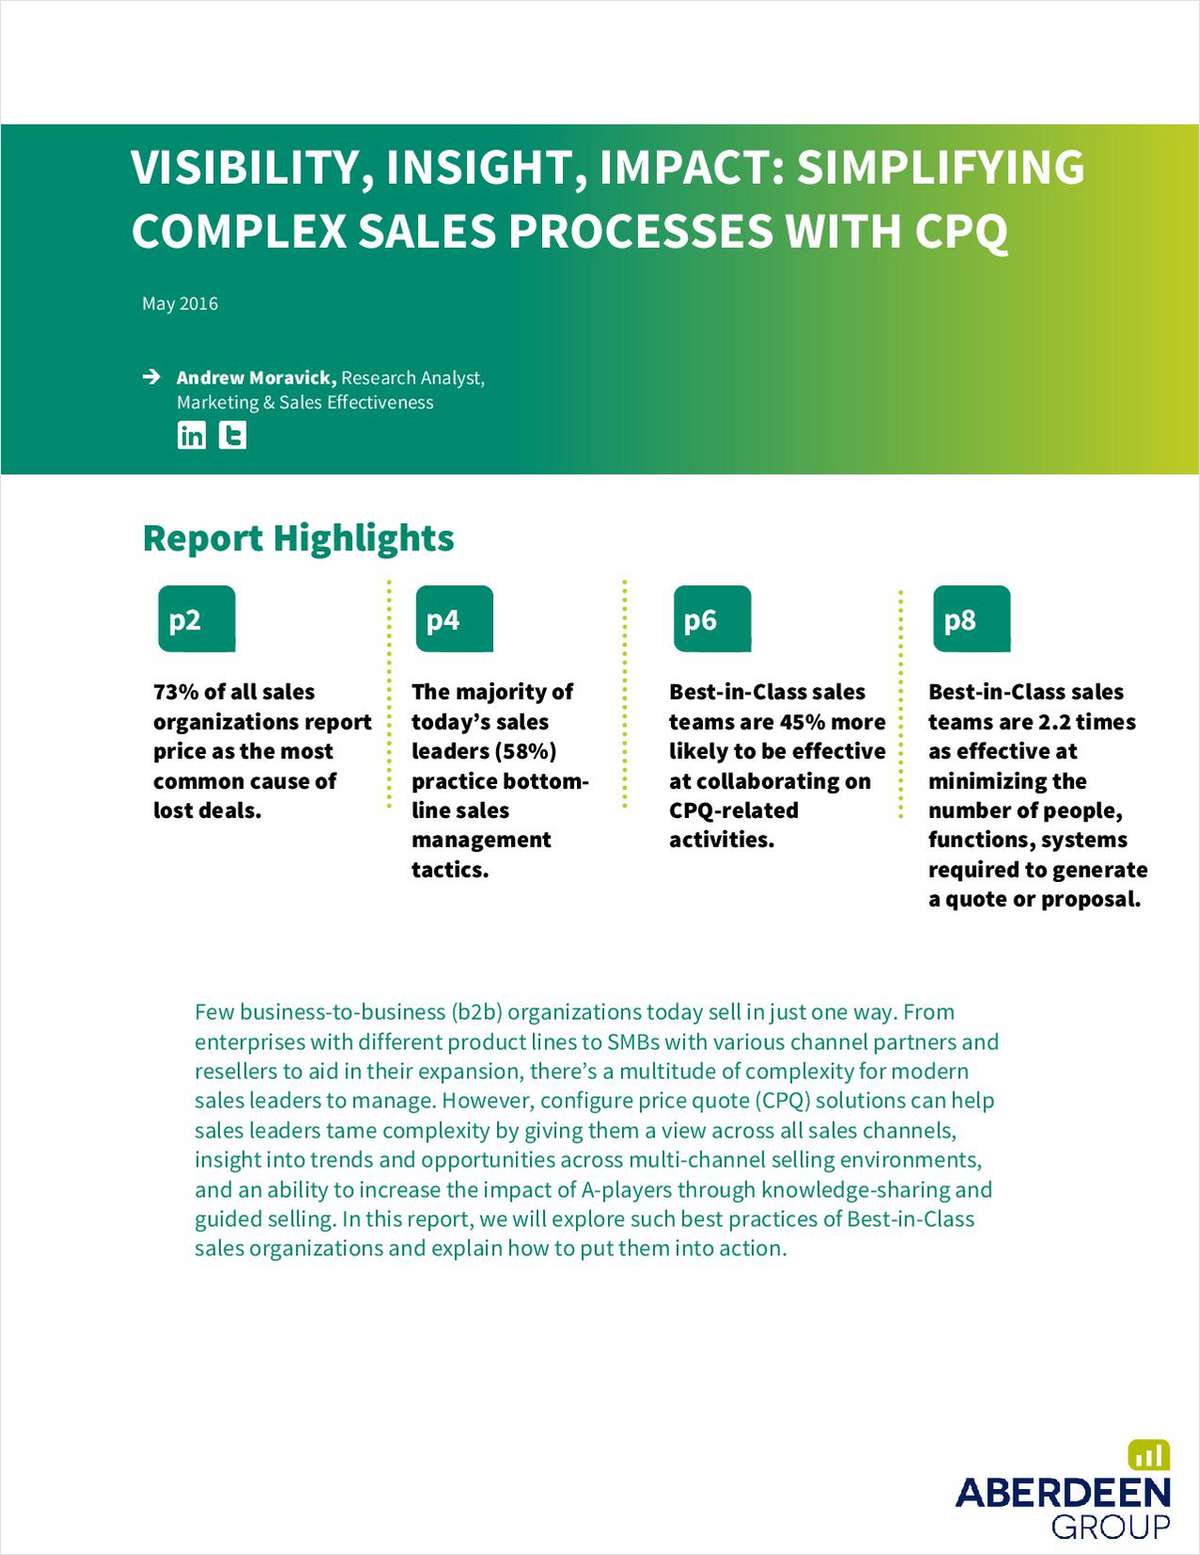 Aberdeen Report: Simplifying Complex Sales Processes with CPQ